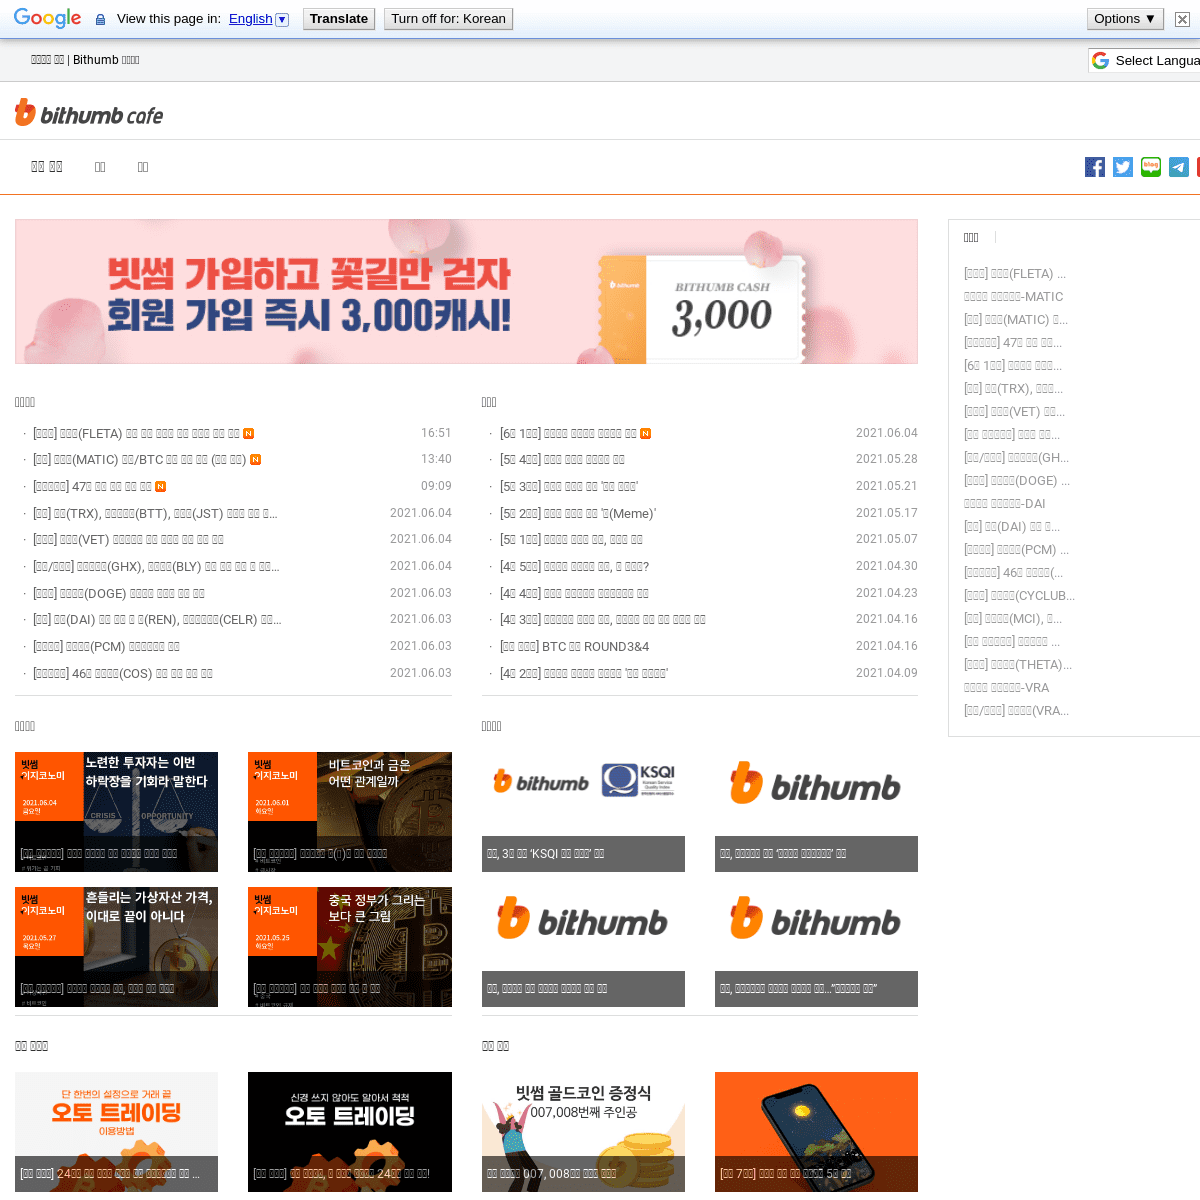 A complete backup of https://bithumb.cafe